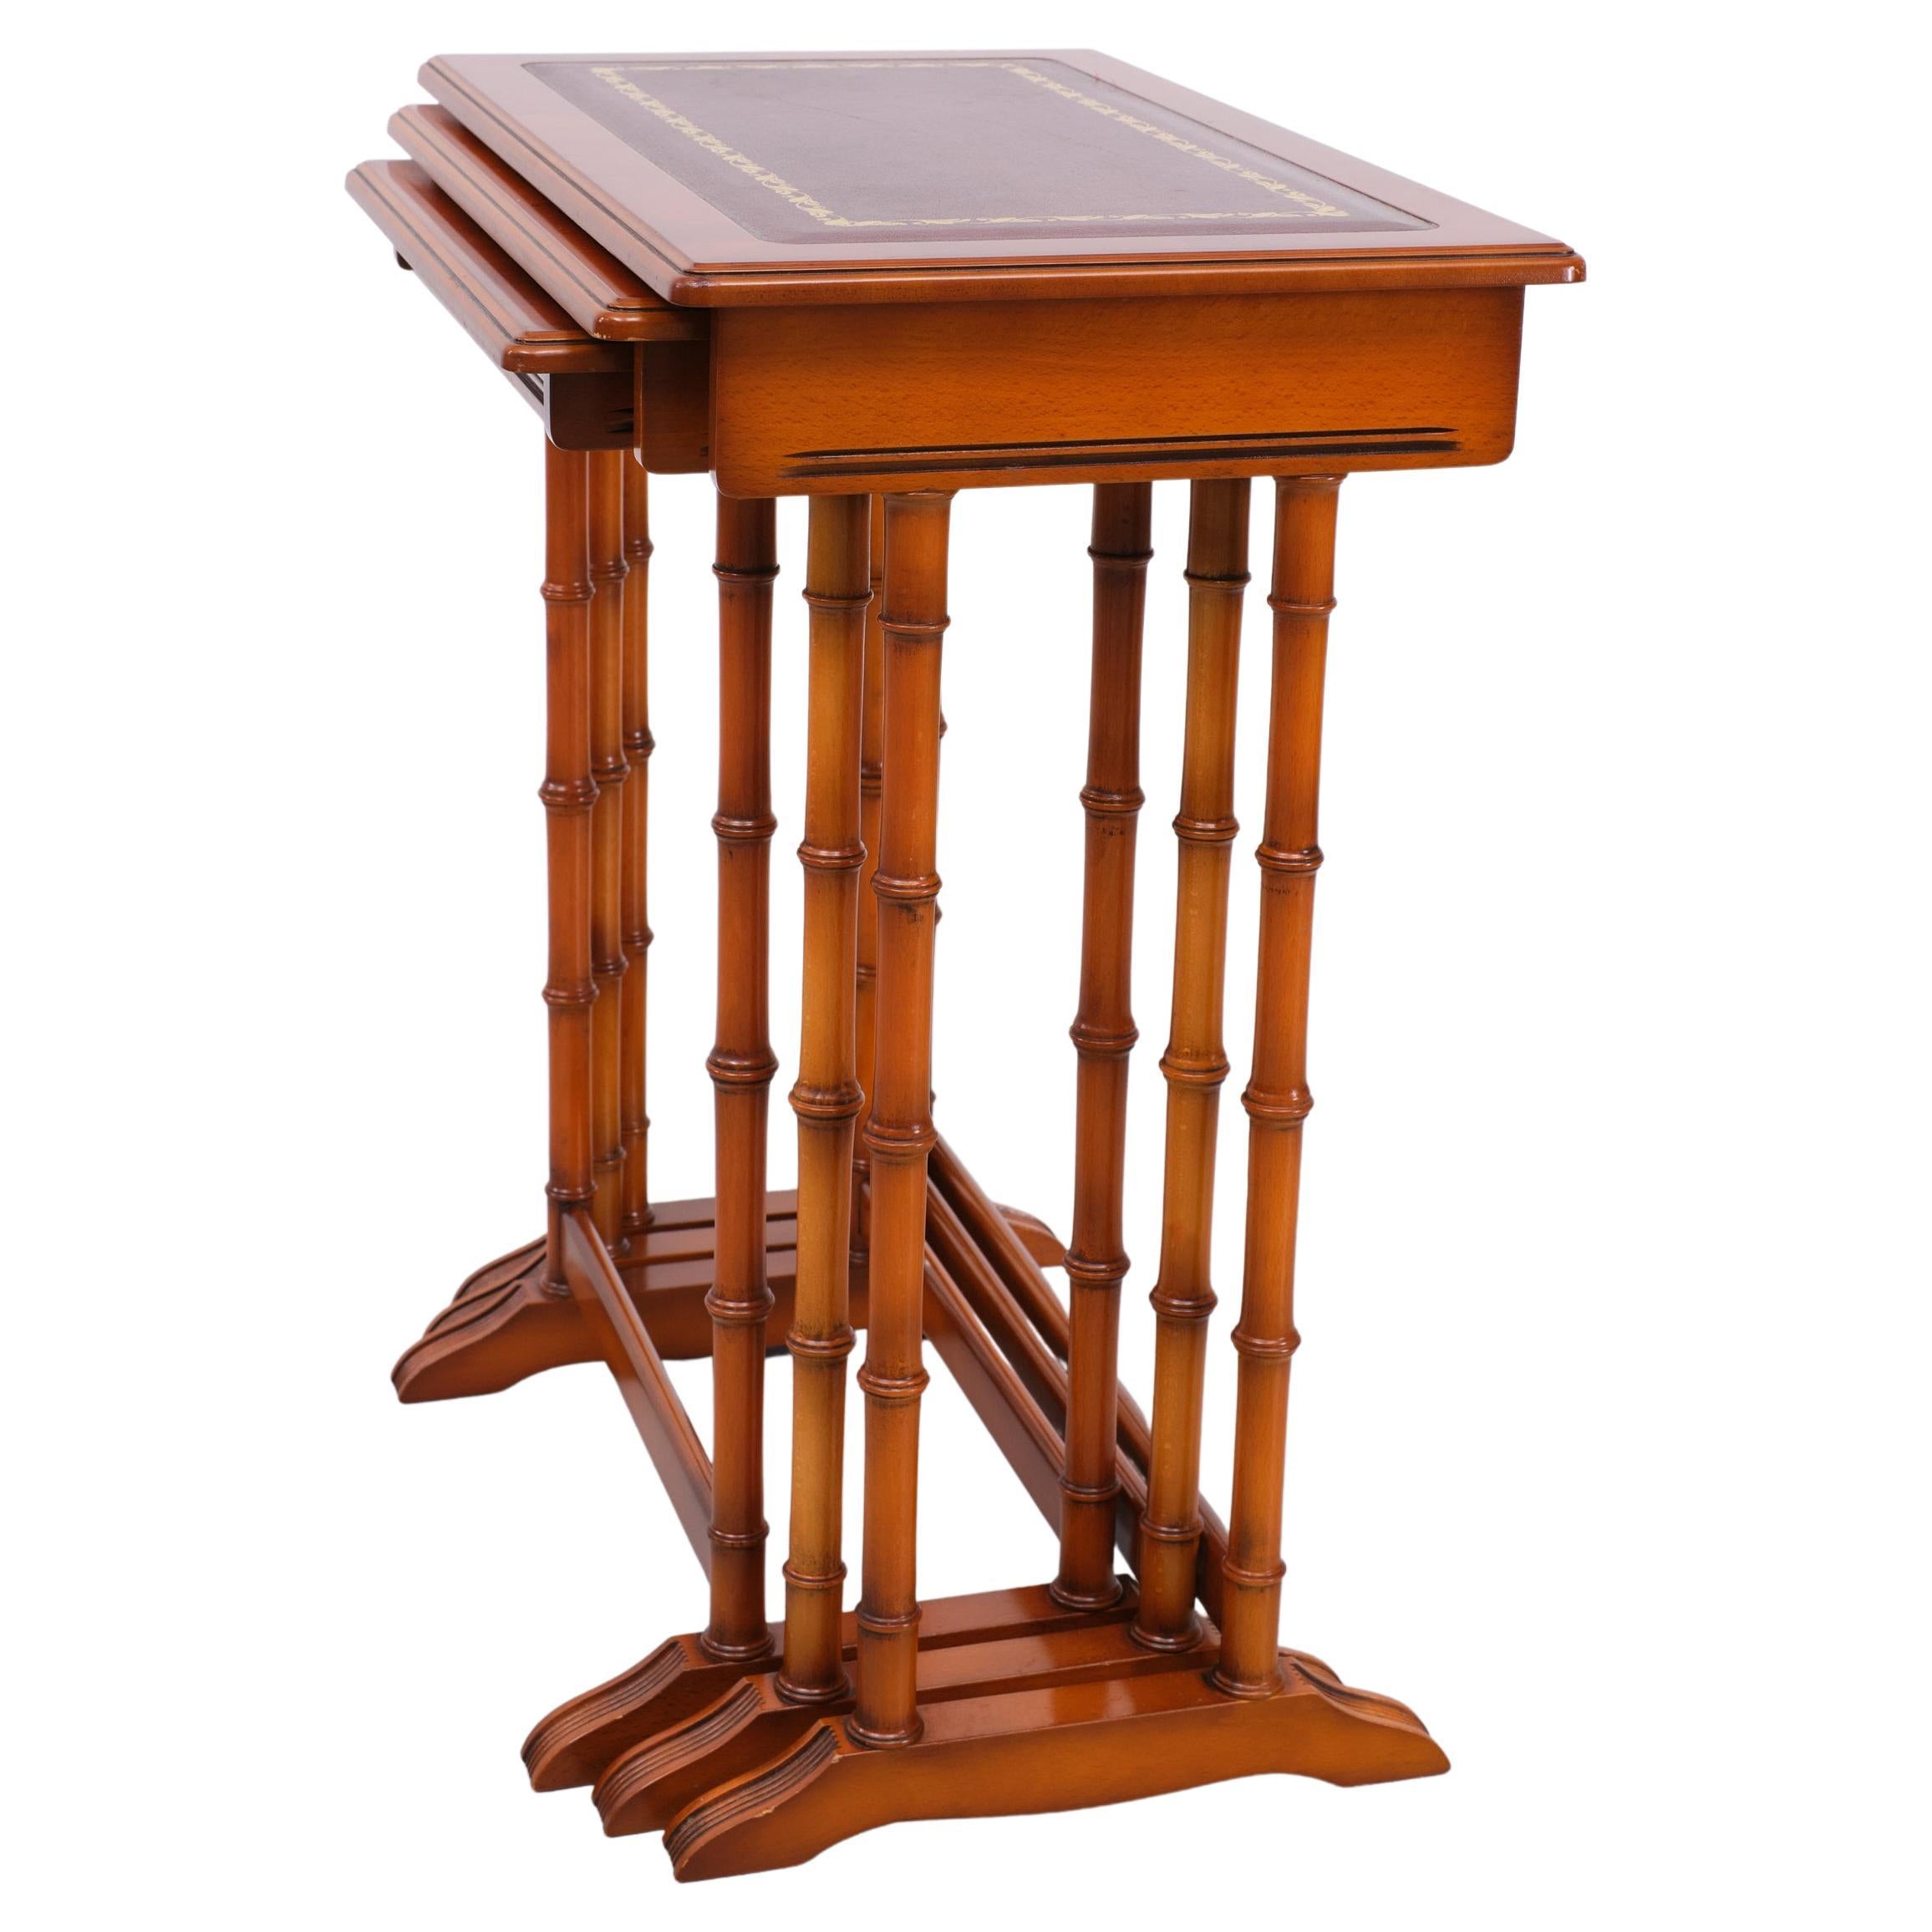 Edwardian   Exclusive English furniture  Cherry wood nesting tables  1970s  For Sale